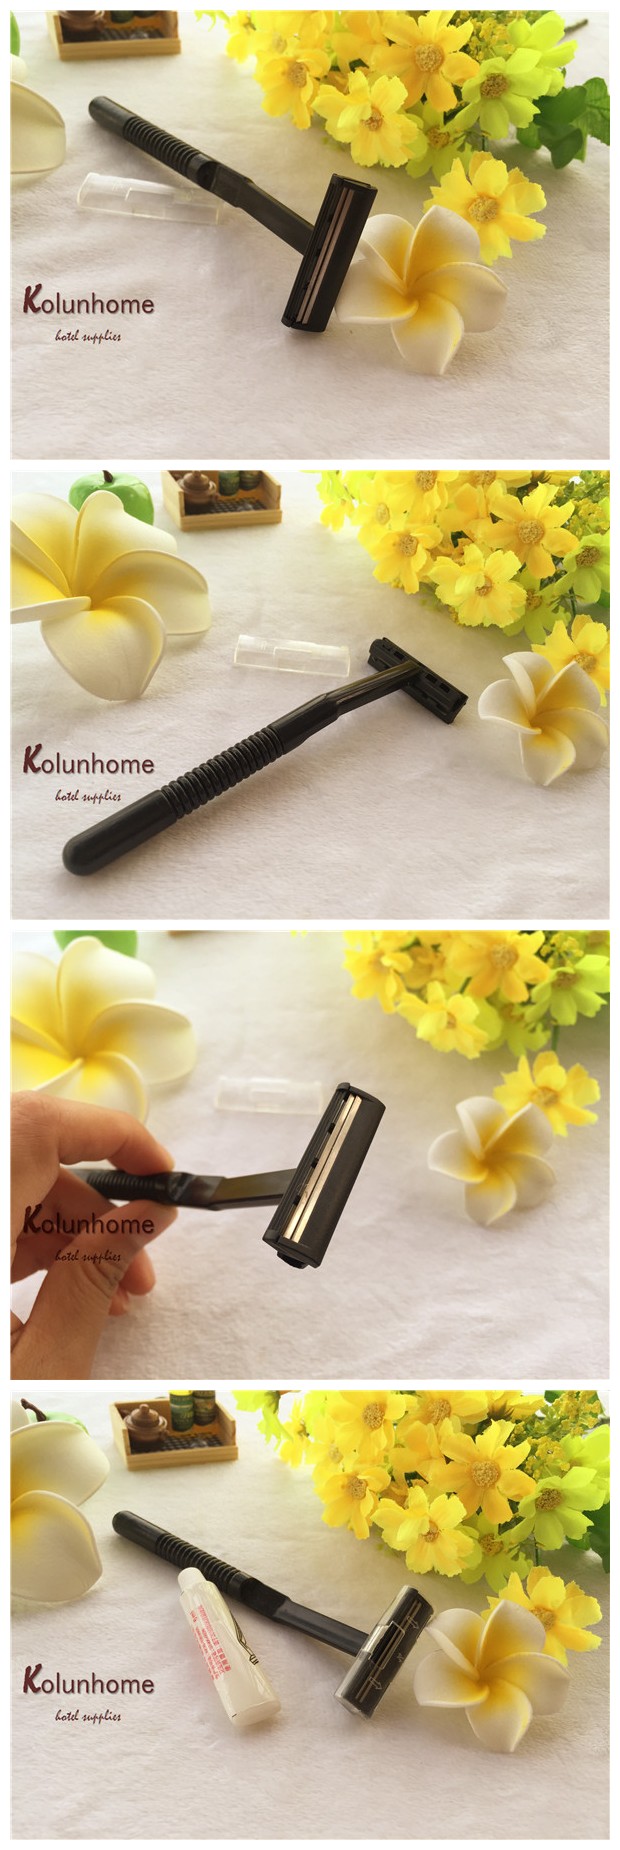 Long handle cheap hotel shaving kit with fair quality